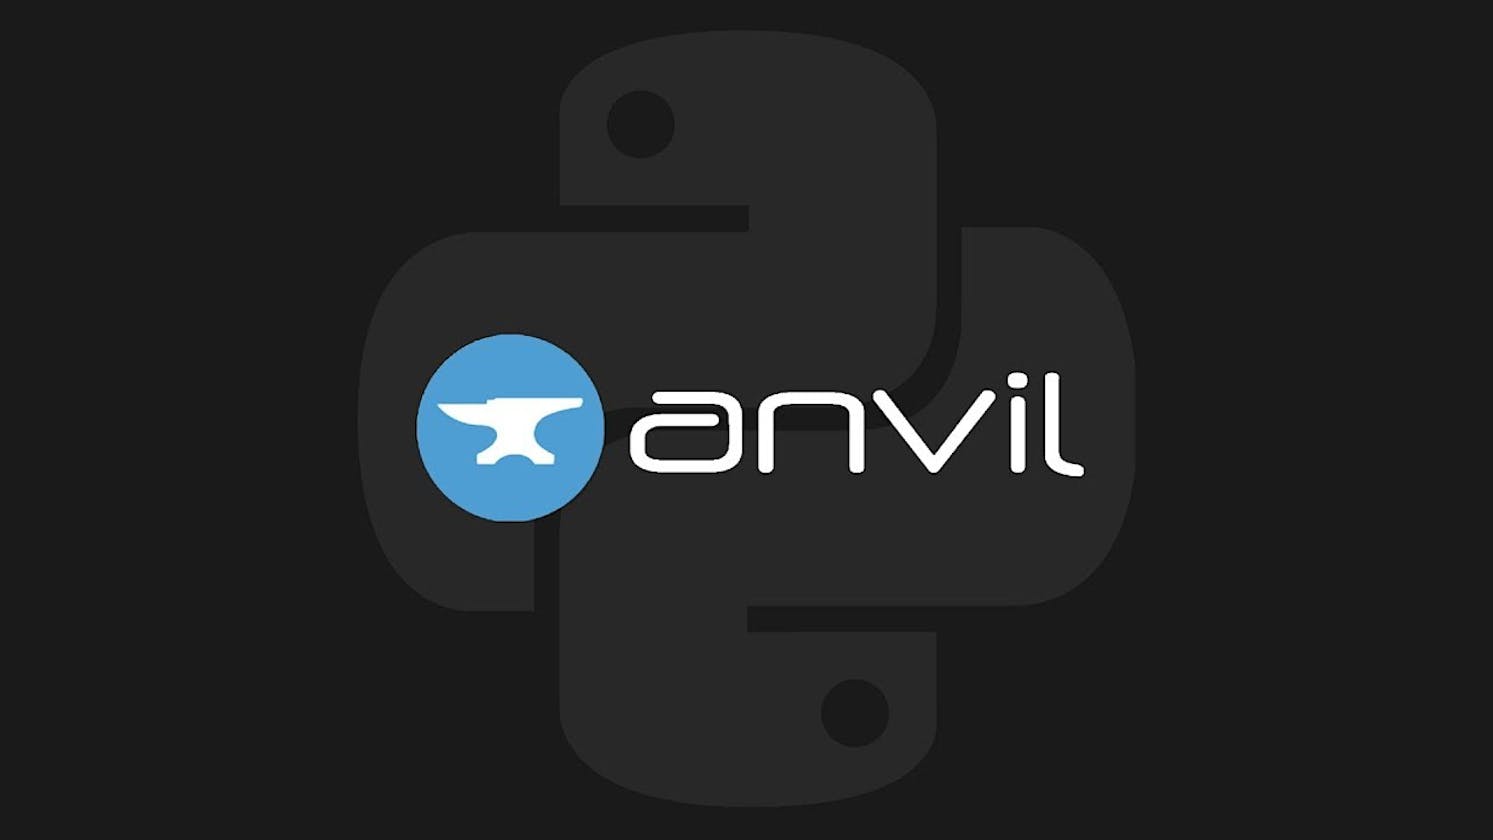 Web app deployment easy with anvil